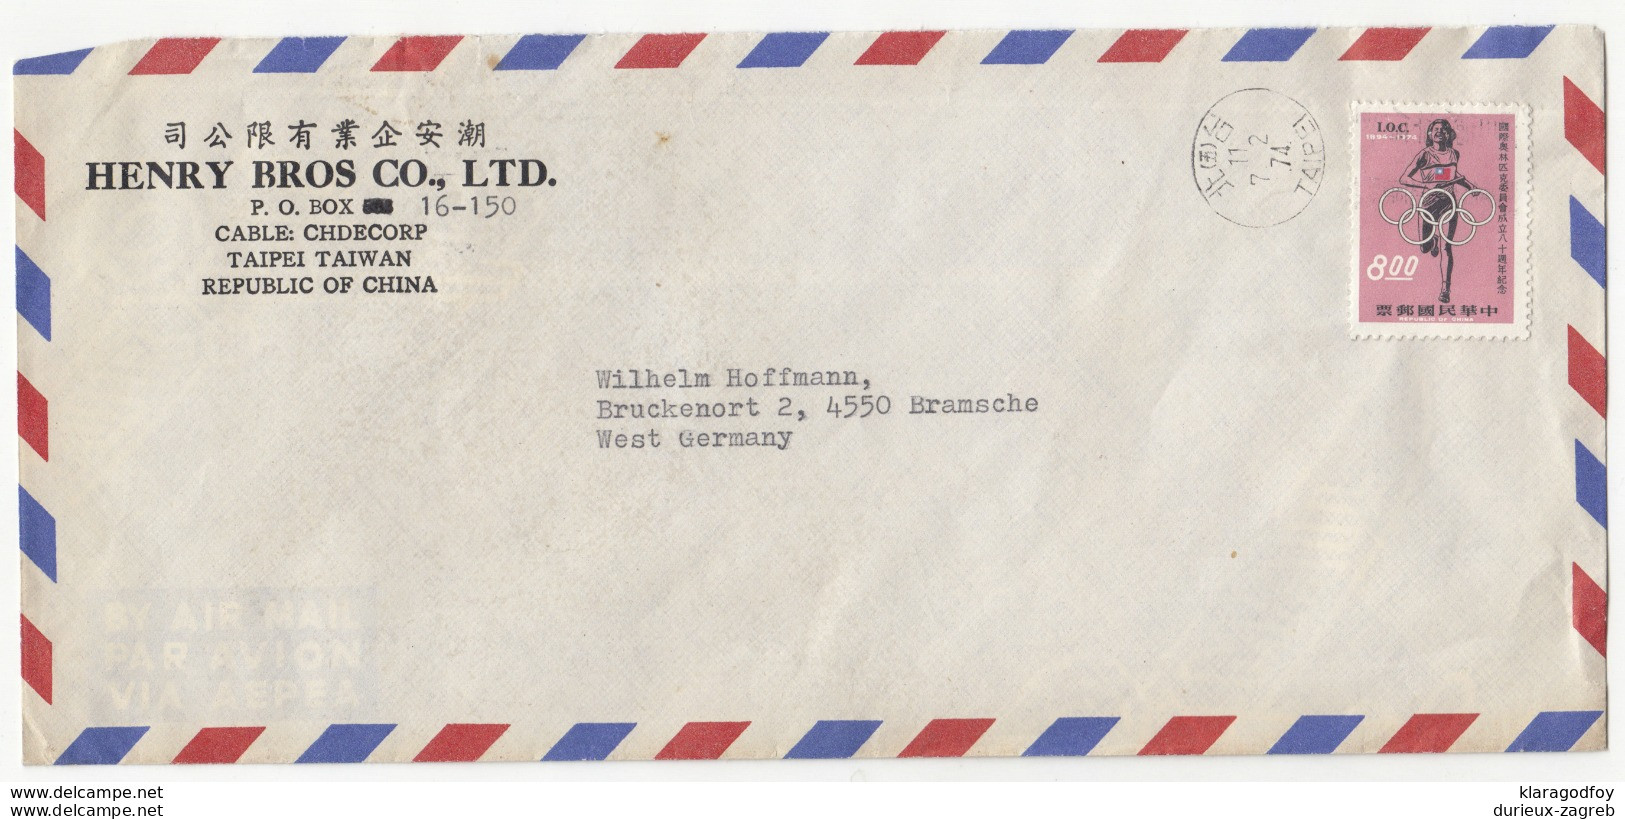 Henry Bros Co. Taipei Company Air Mail Letter Cover Travelled 1974 To Germany  B190920 - Brieven En Documenten